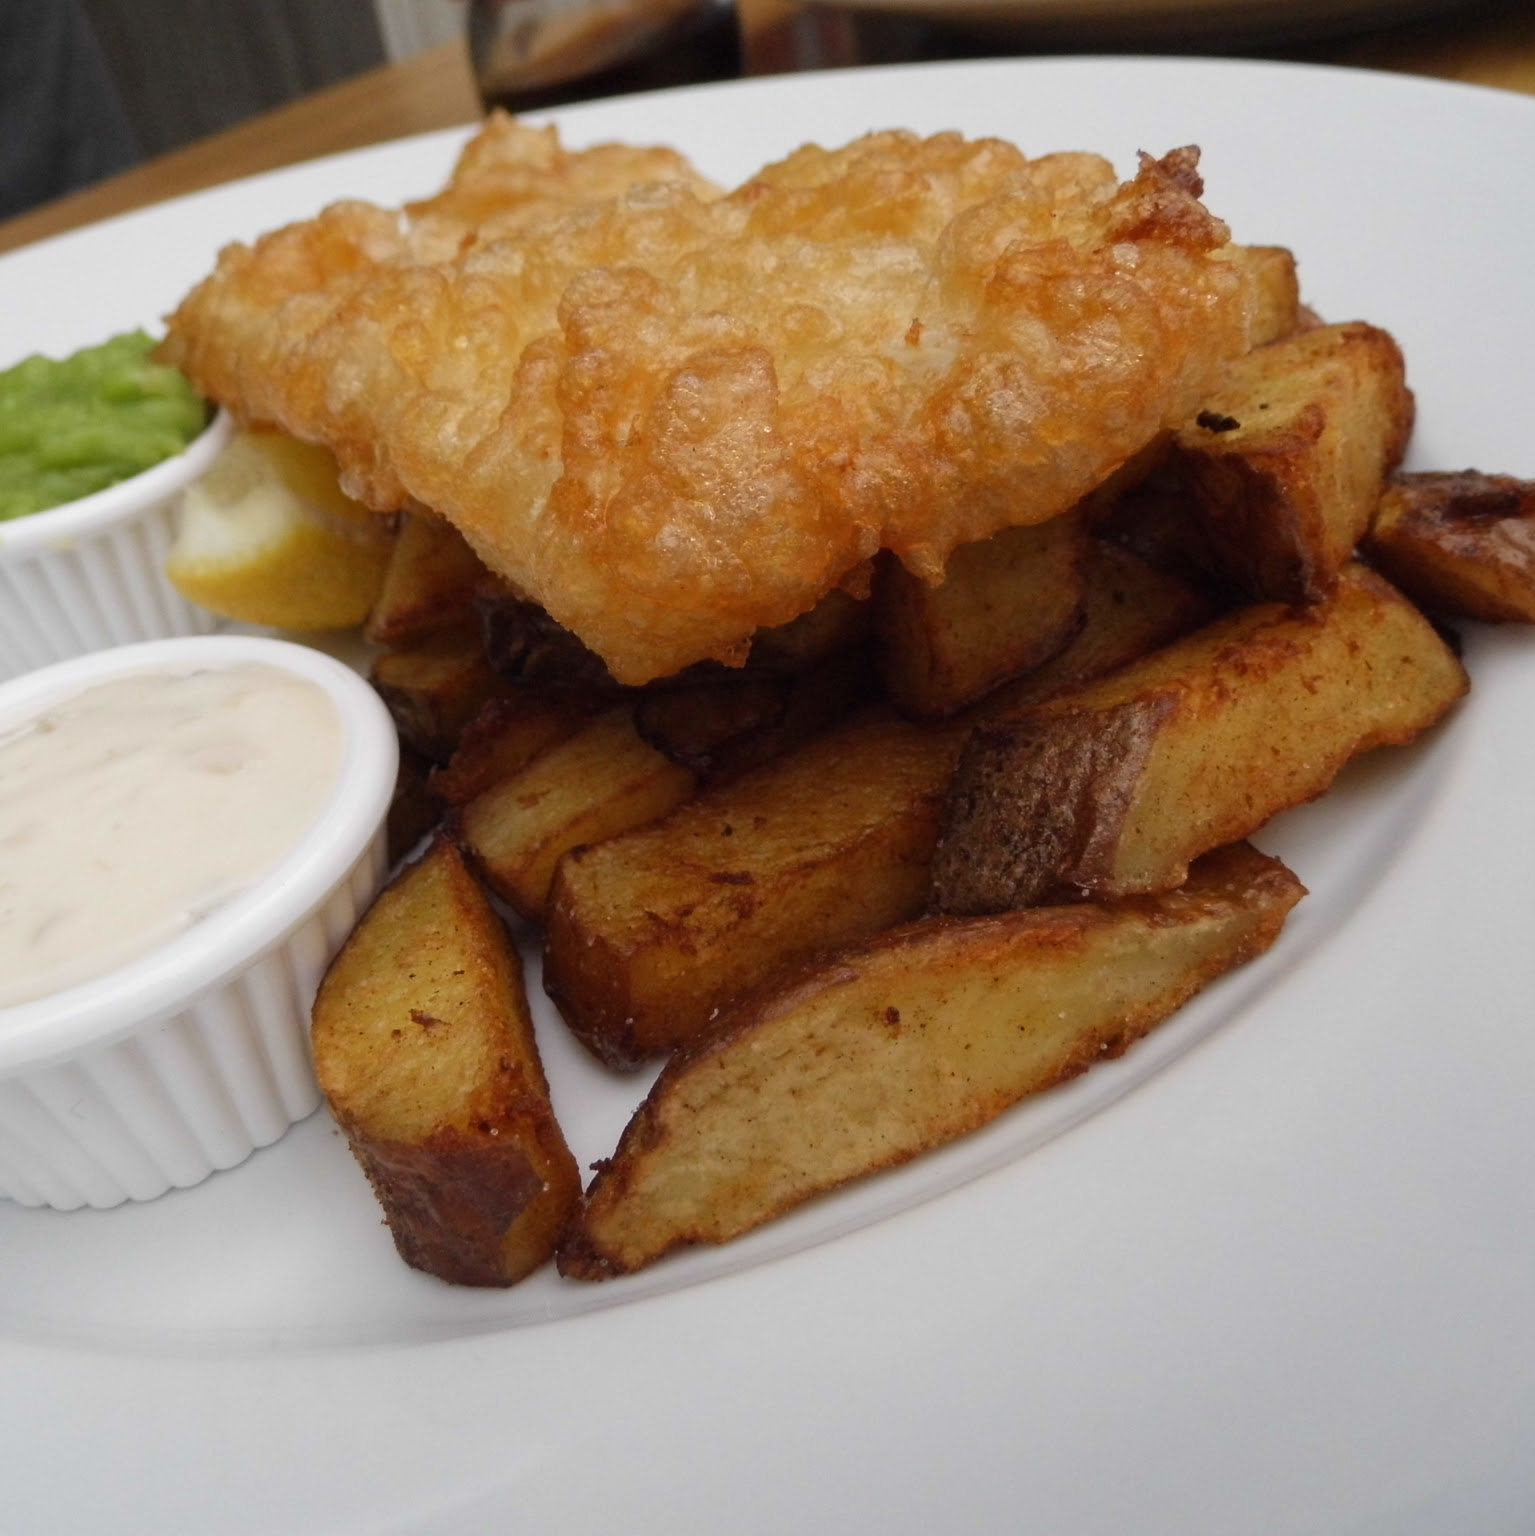 Tuillie Inn Fish and Chips